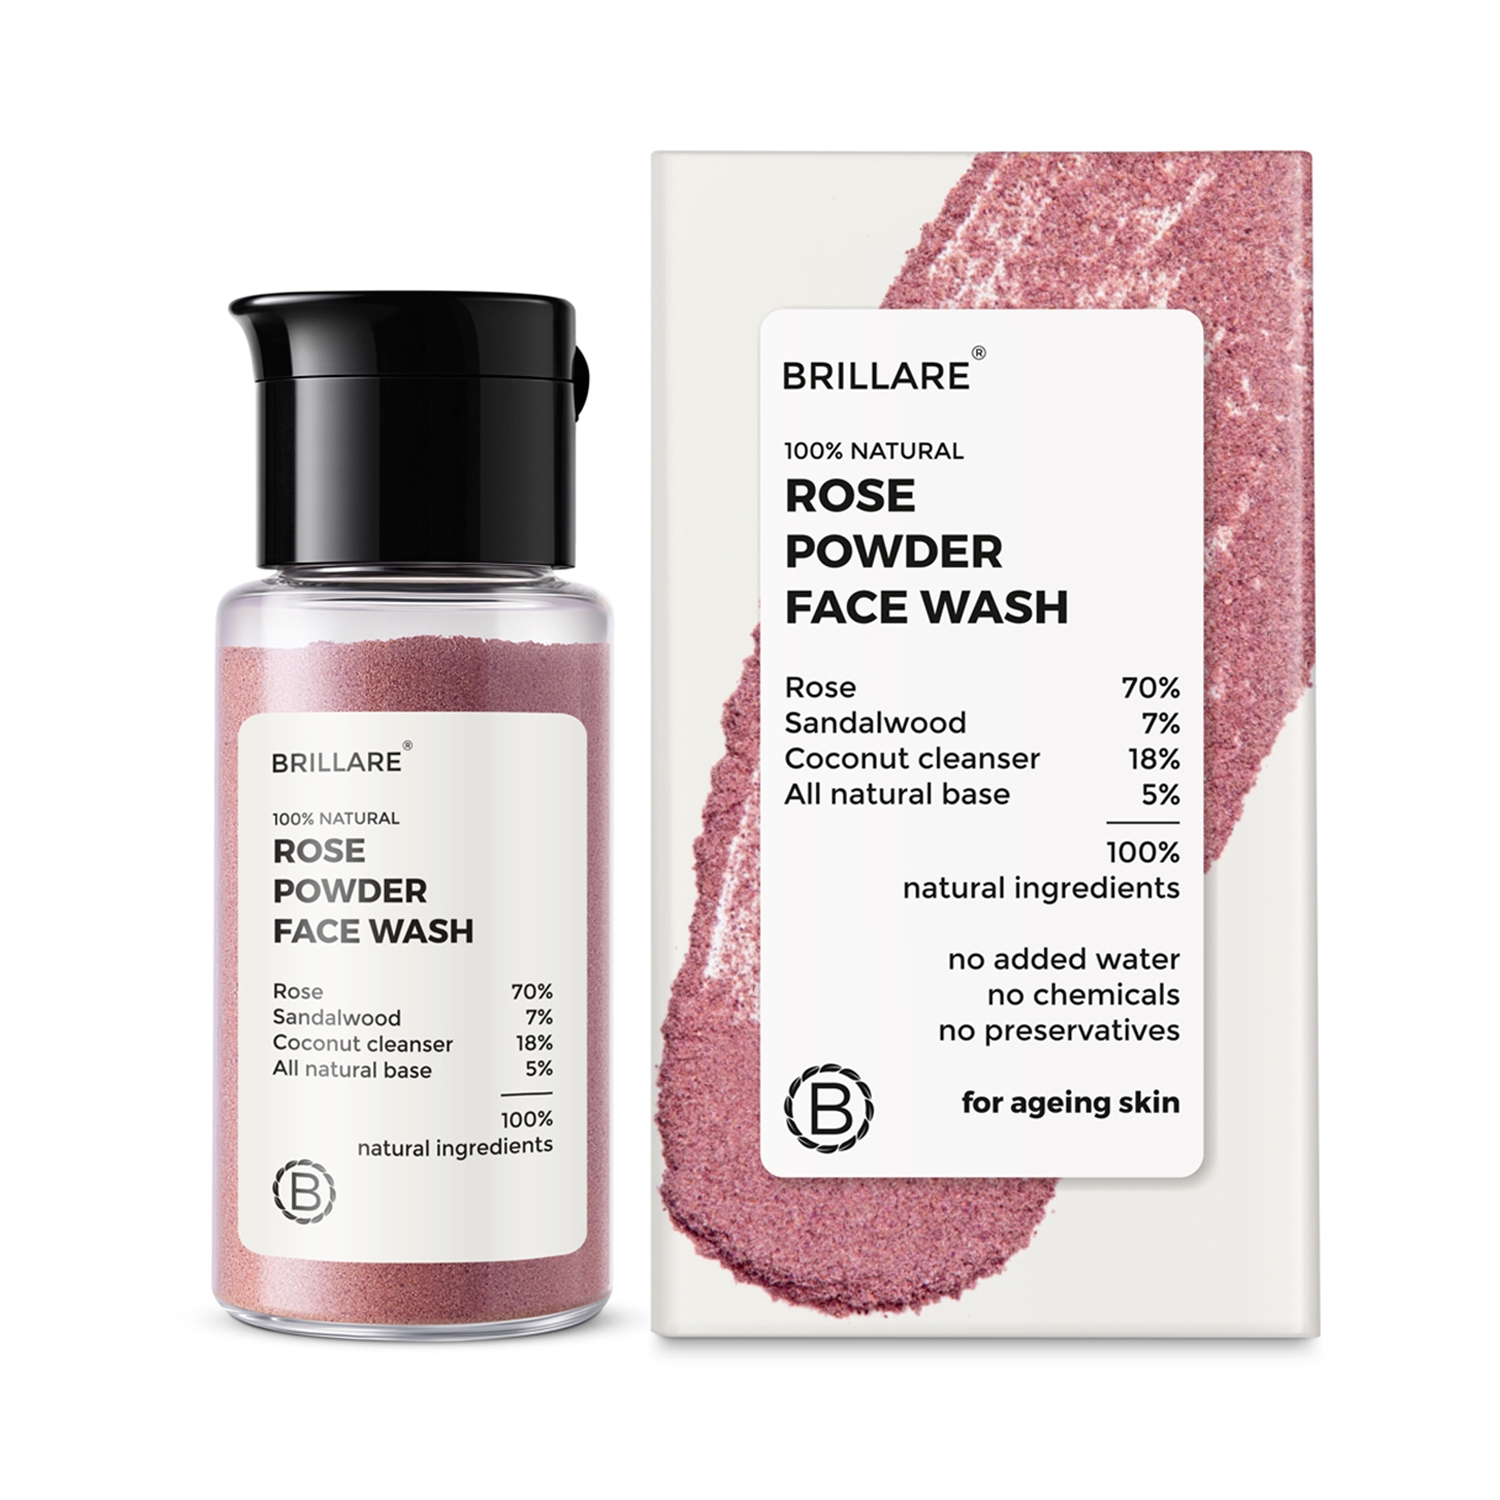 Brillare | Brillare Rose Powder Face Wash For Well Hydrated, Younger Looking Skin (15g)